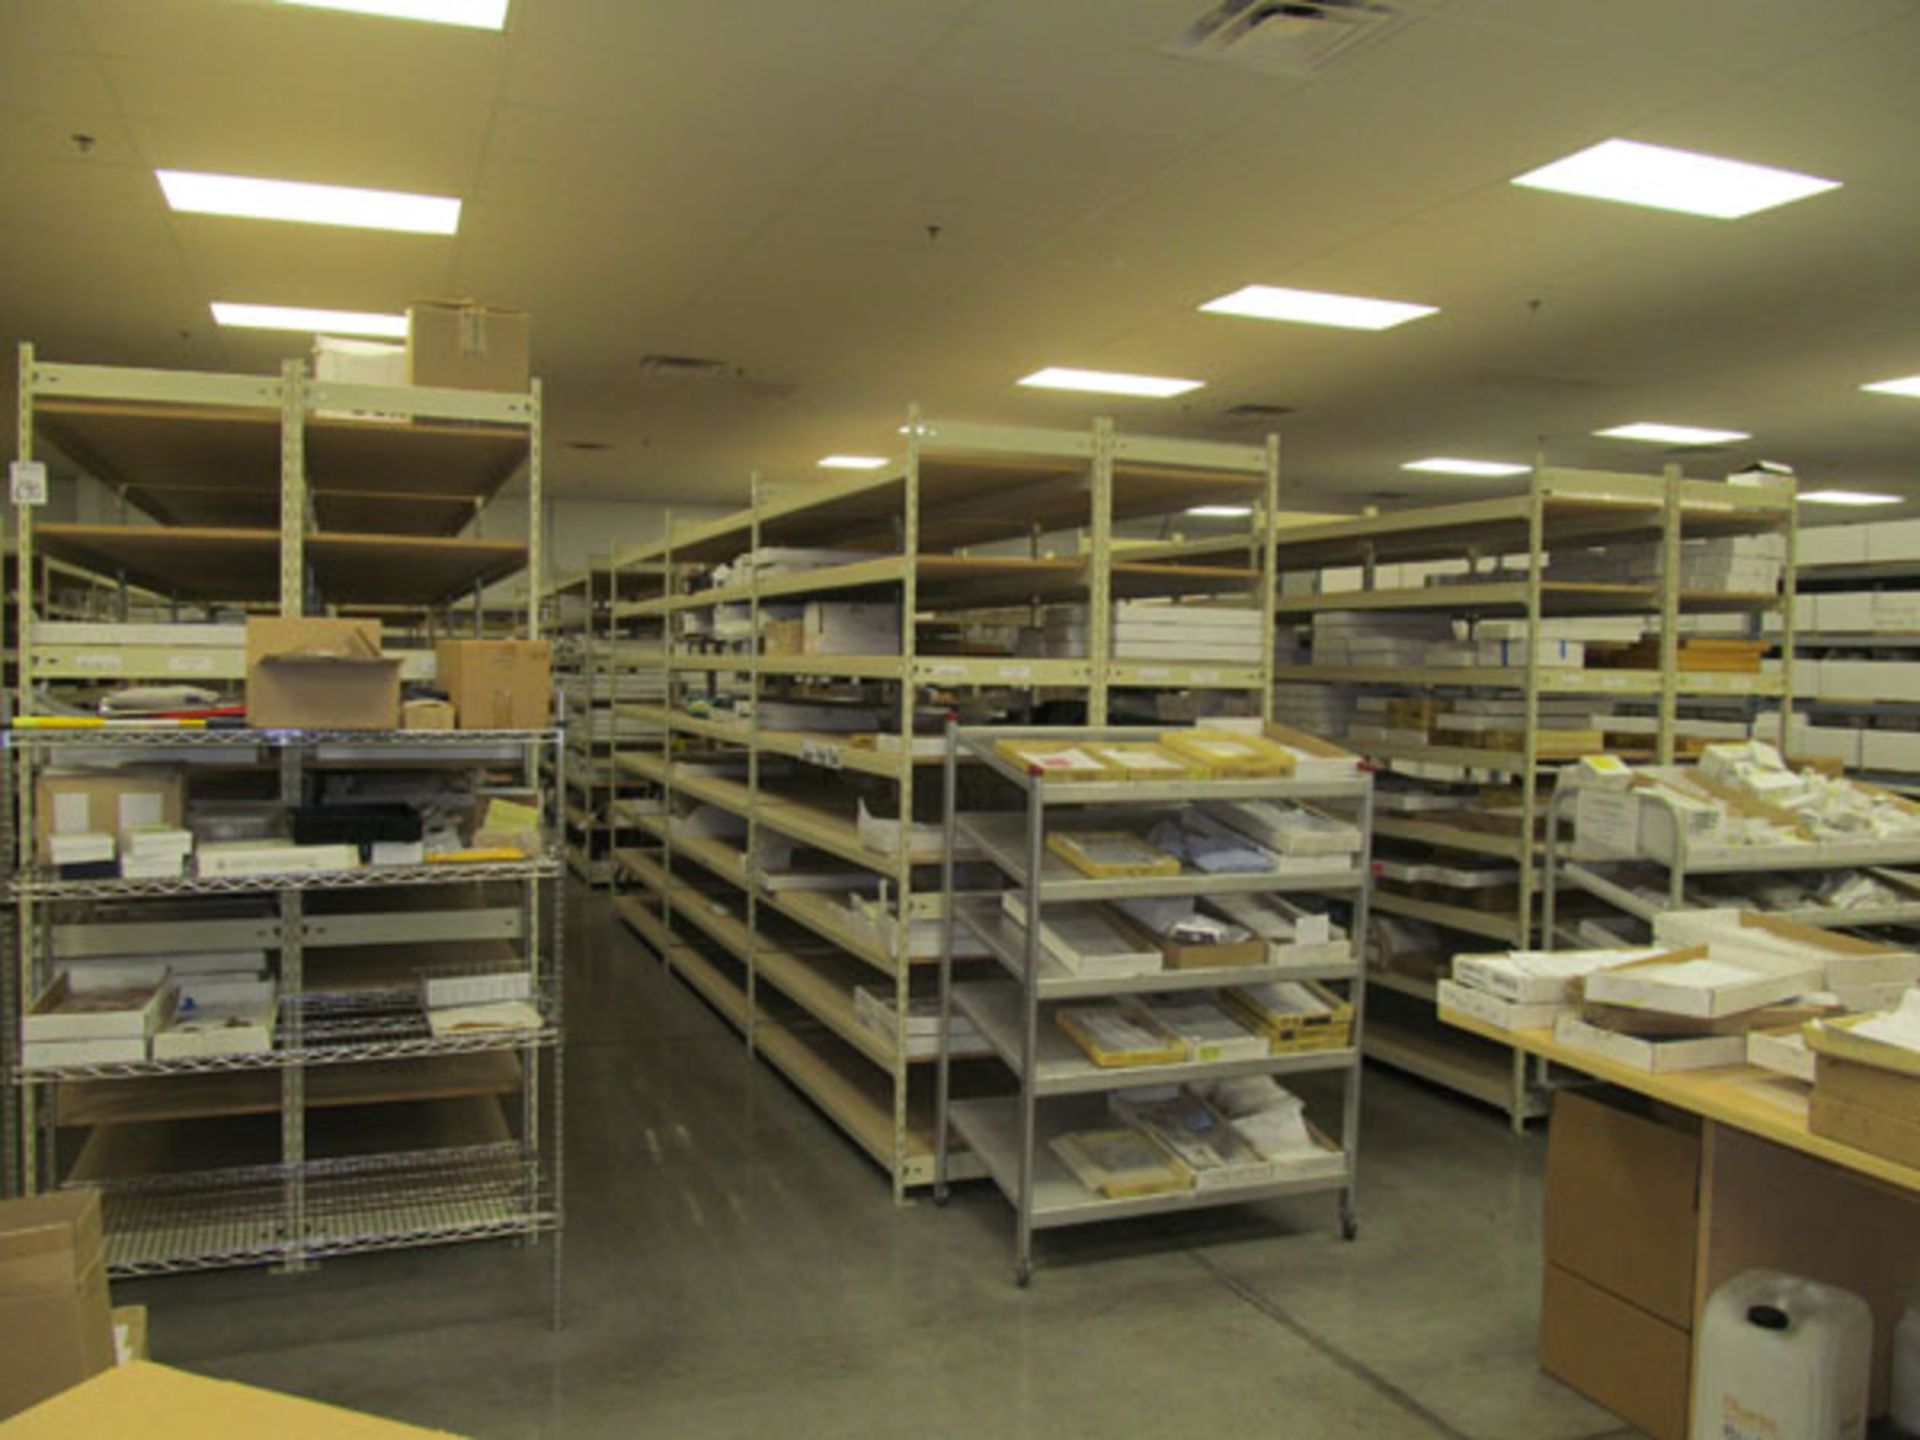 42-Sections 24" x 72" x 96" High Adjustable Steel Shelving, (Contents Not Included)